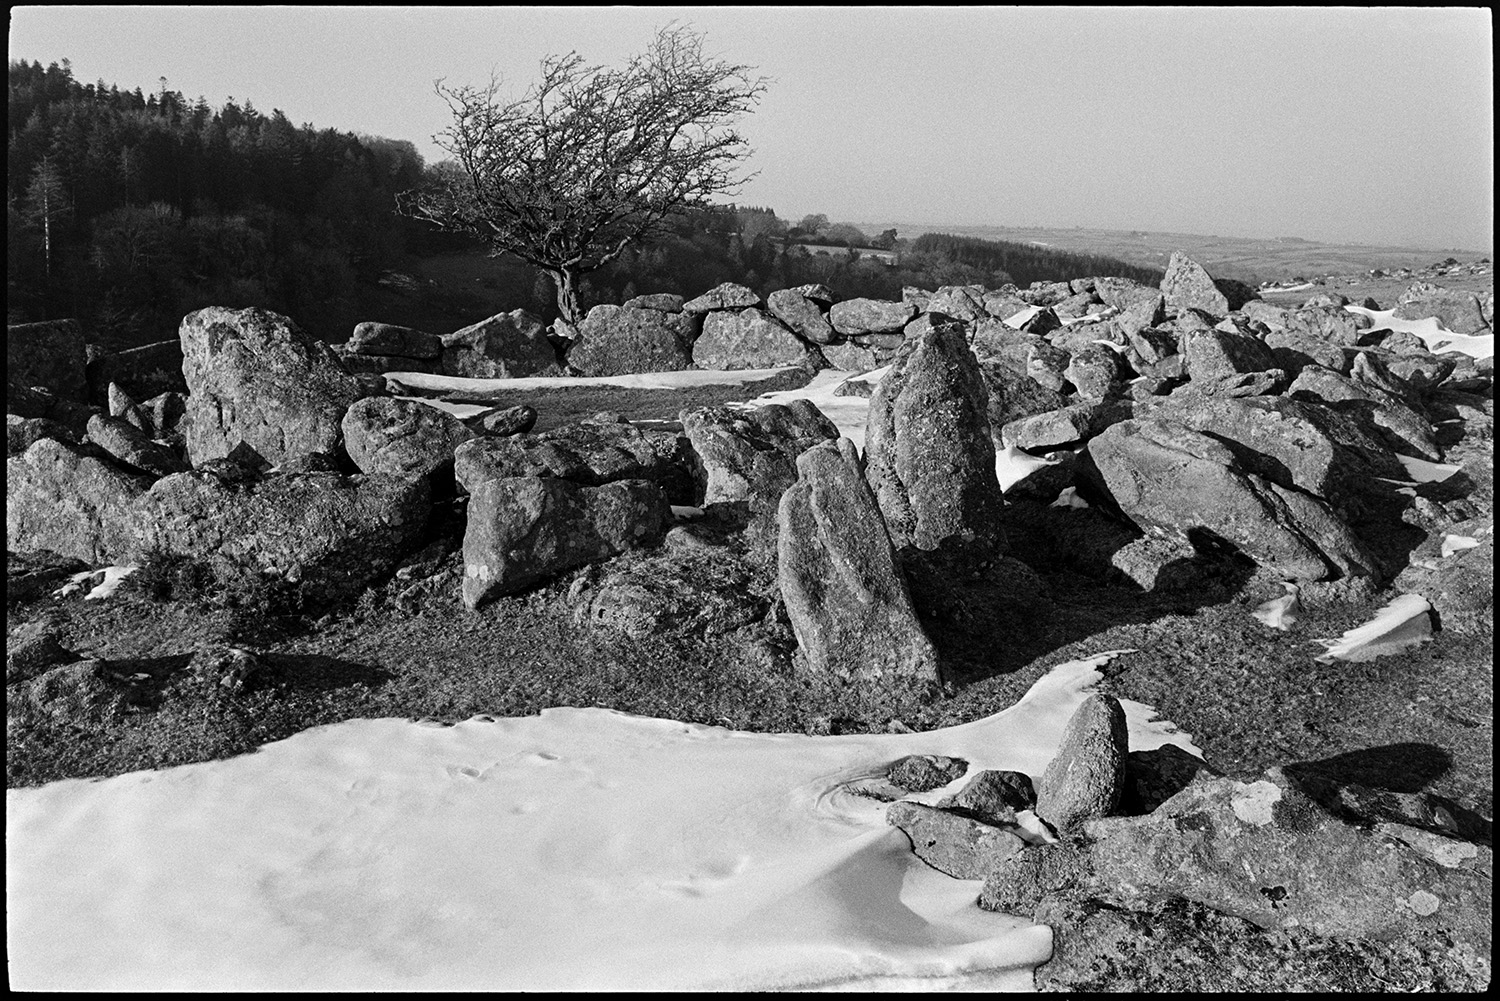 Rocky stream under snow and frost, blasted trees. 
[Snow and ice on a rocky area near Gidleigh on Dartmoor. A wind blasted tree can be seen in the background against woodland.]